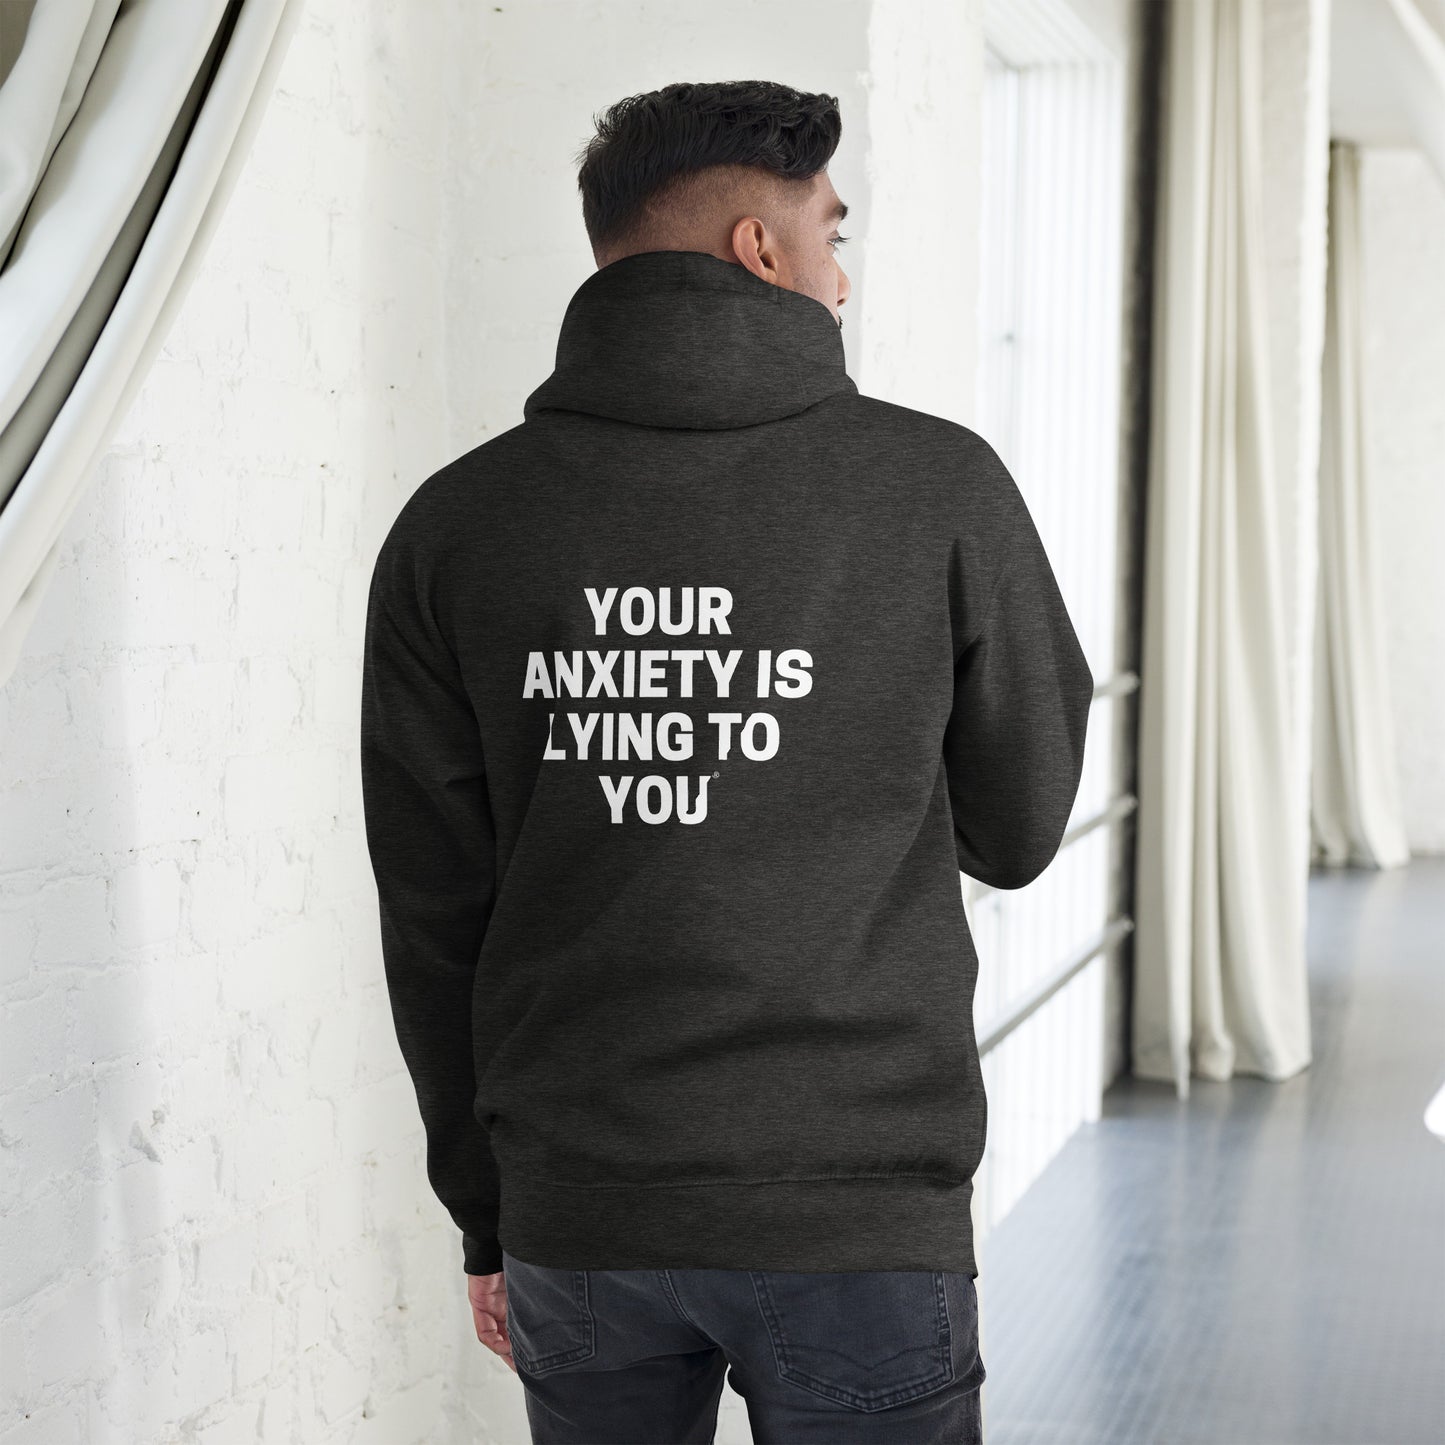 Your Anxiety is Lying to You® Unisex Hoodie